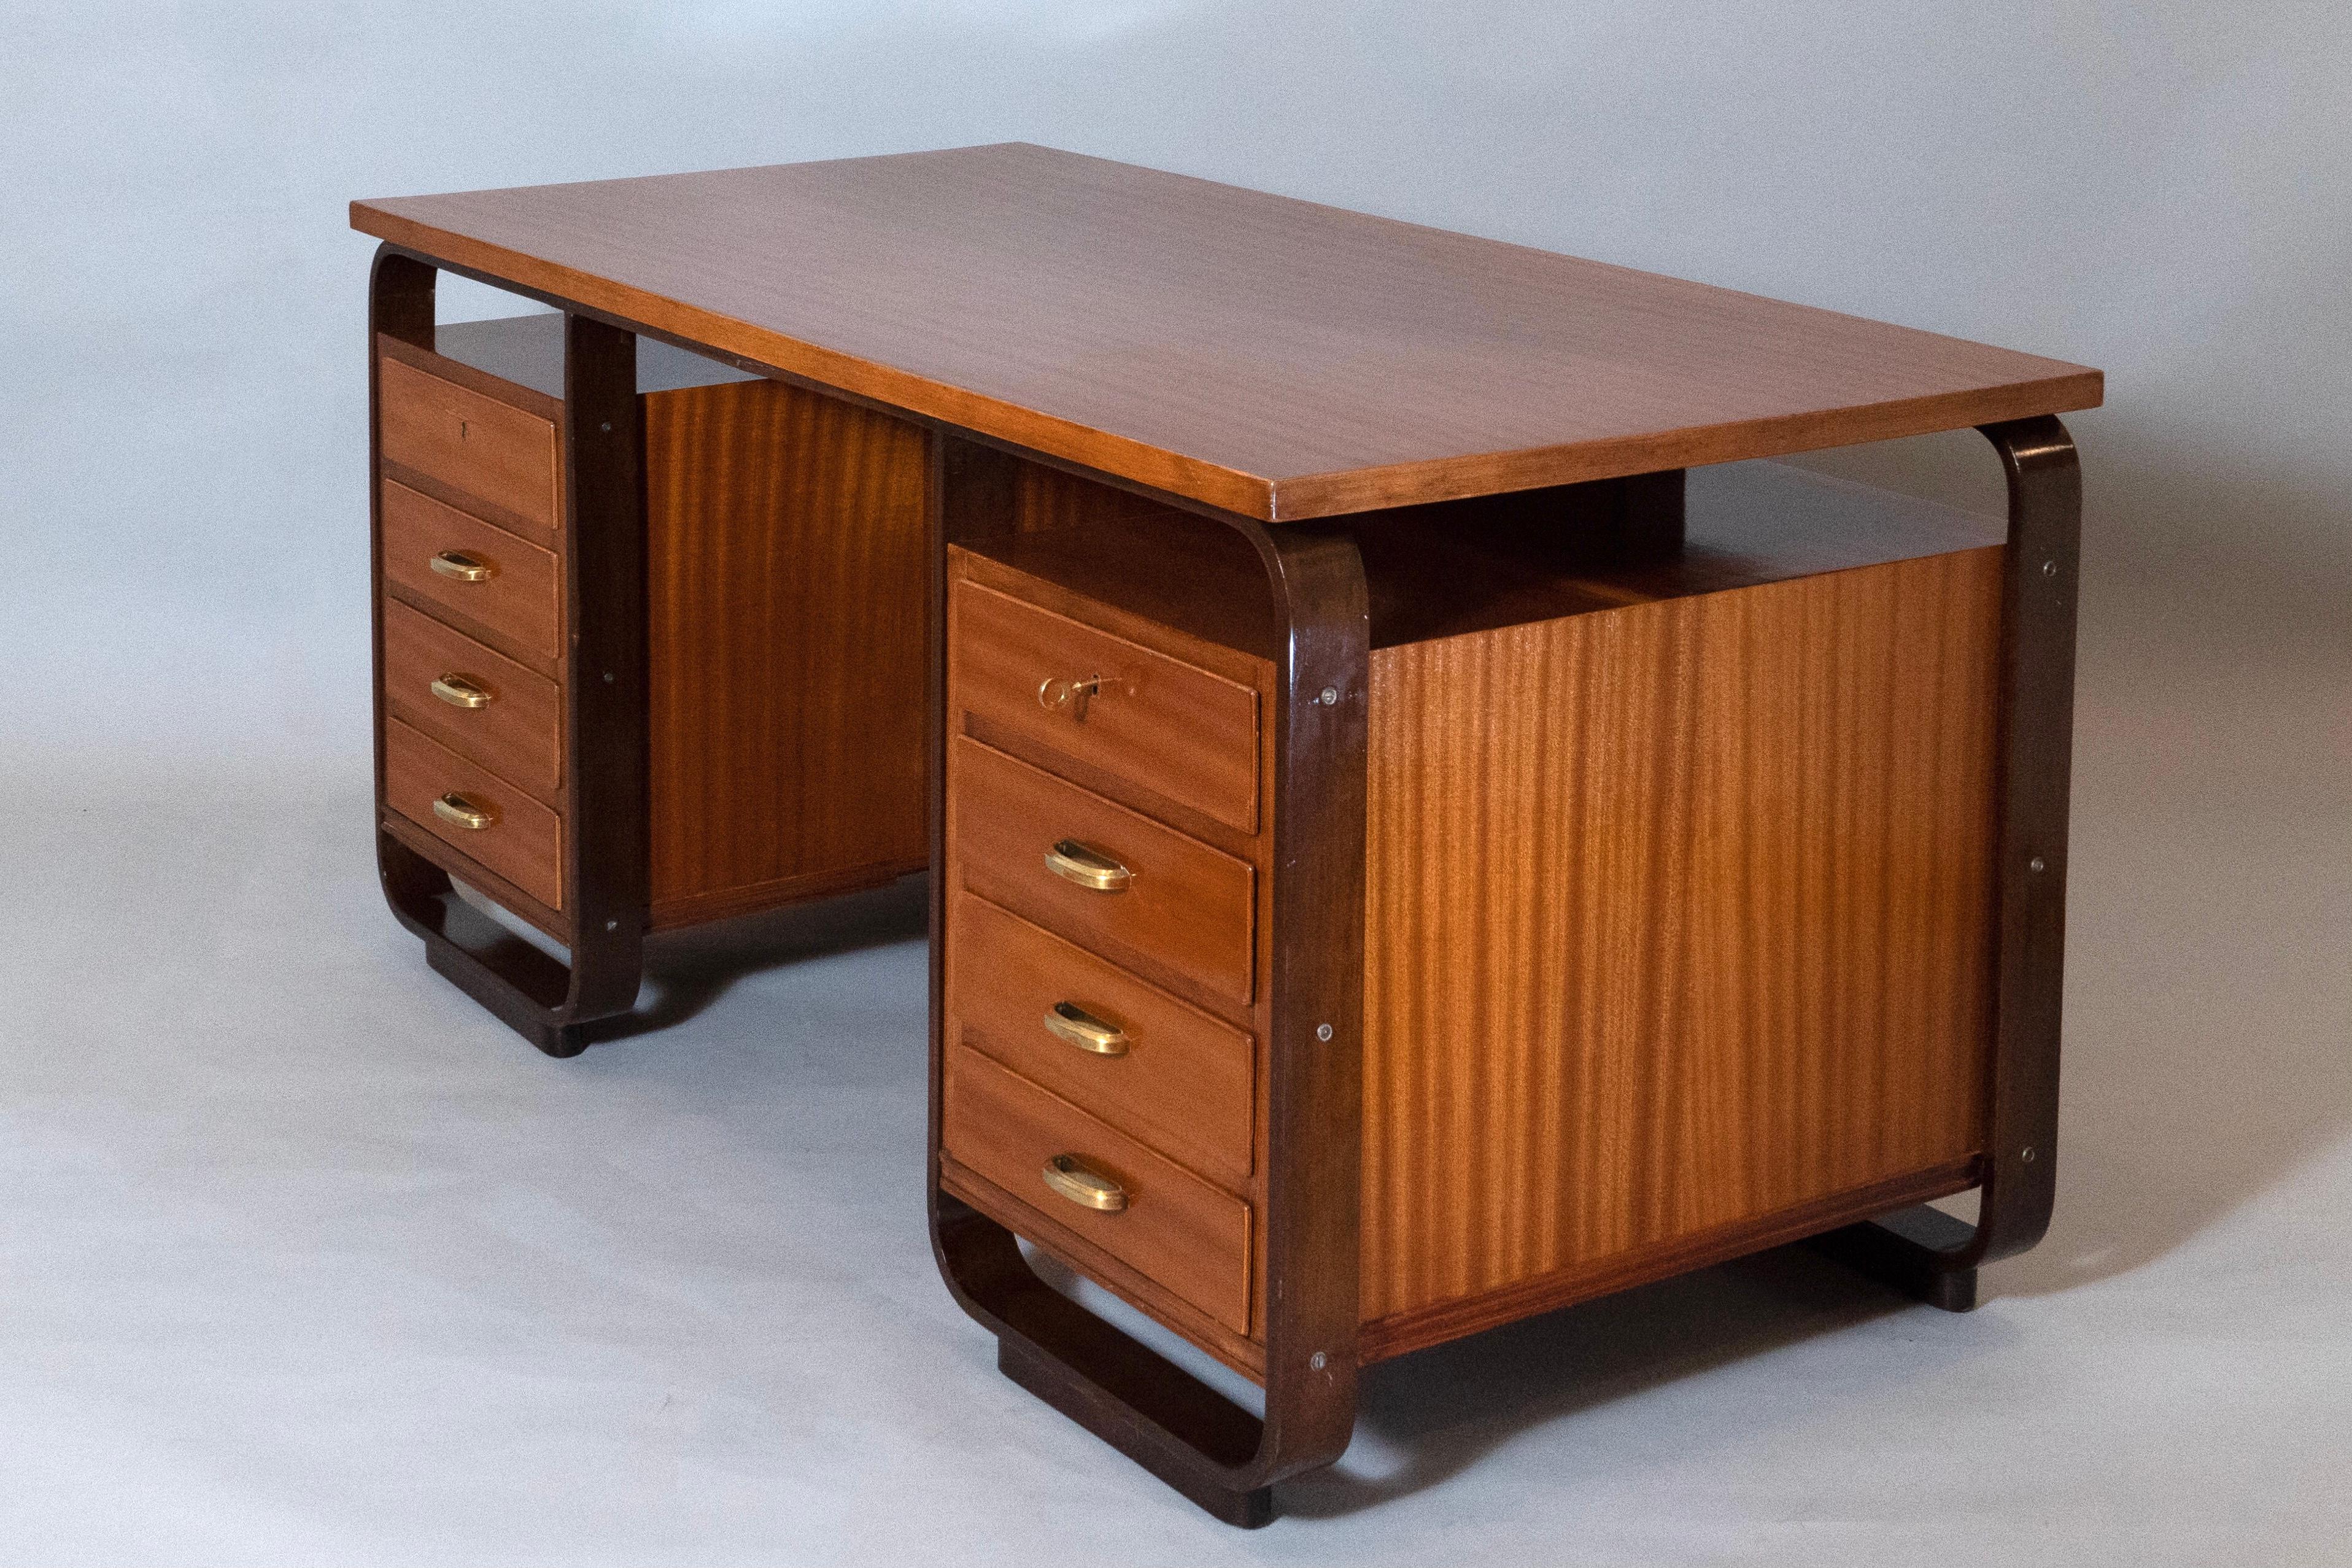 Giuseppe Pagano: Eight Drawer Desk in Fruitwood and Brass, Italy 1940 For Sale 2